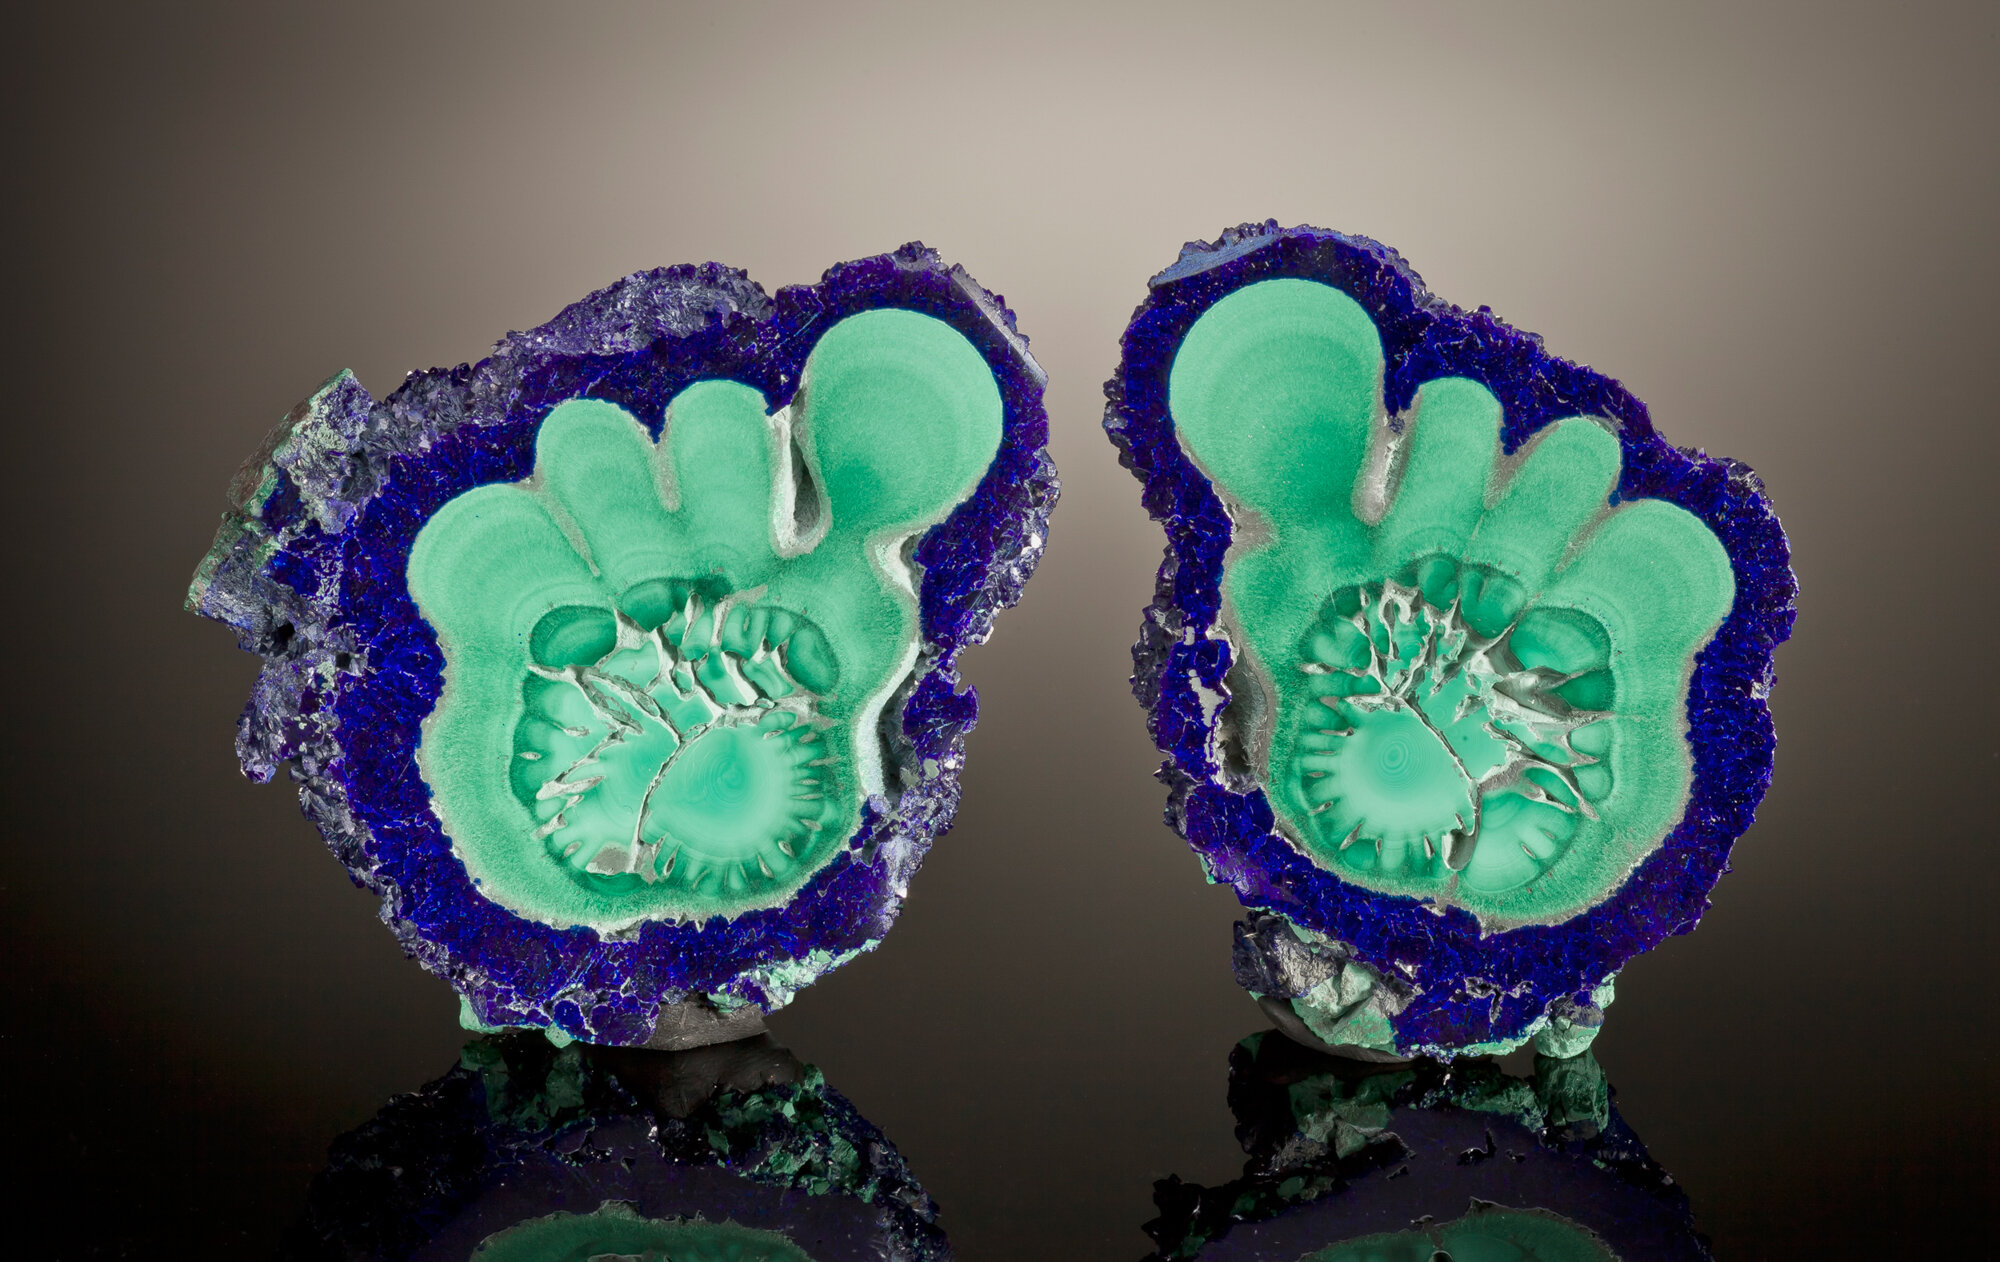  A pair of azurite and malachite slices, 7.7 cm tall, from the Liufengshan mine, Guichi district, Chizhou Prefecture, Anhui Province, China. Ex Ken Roberts collection. 